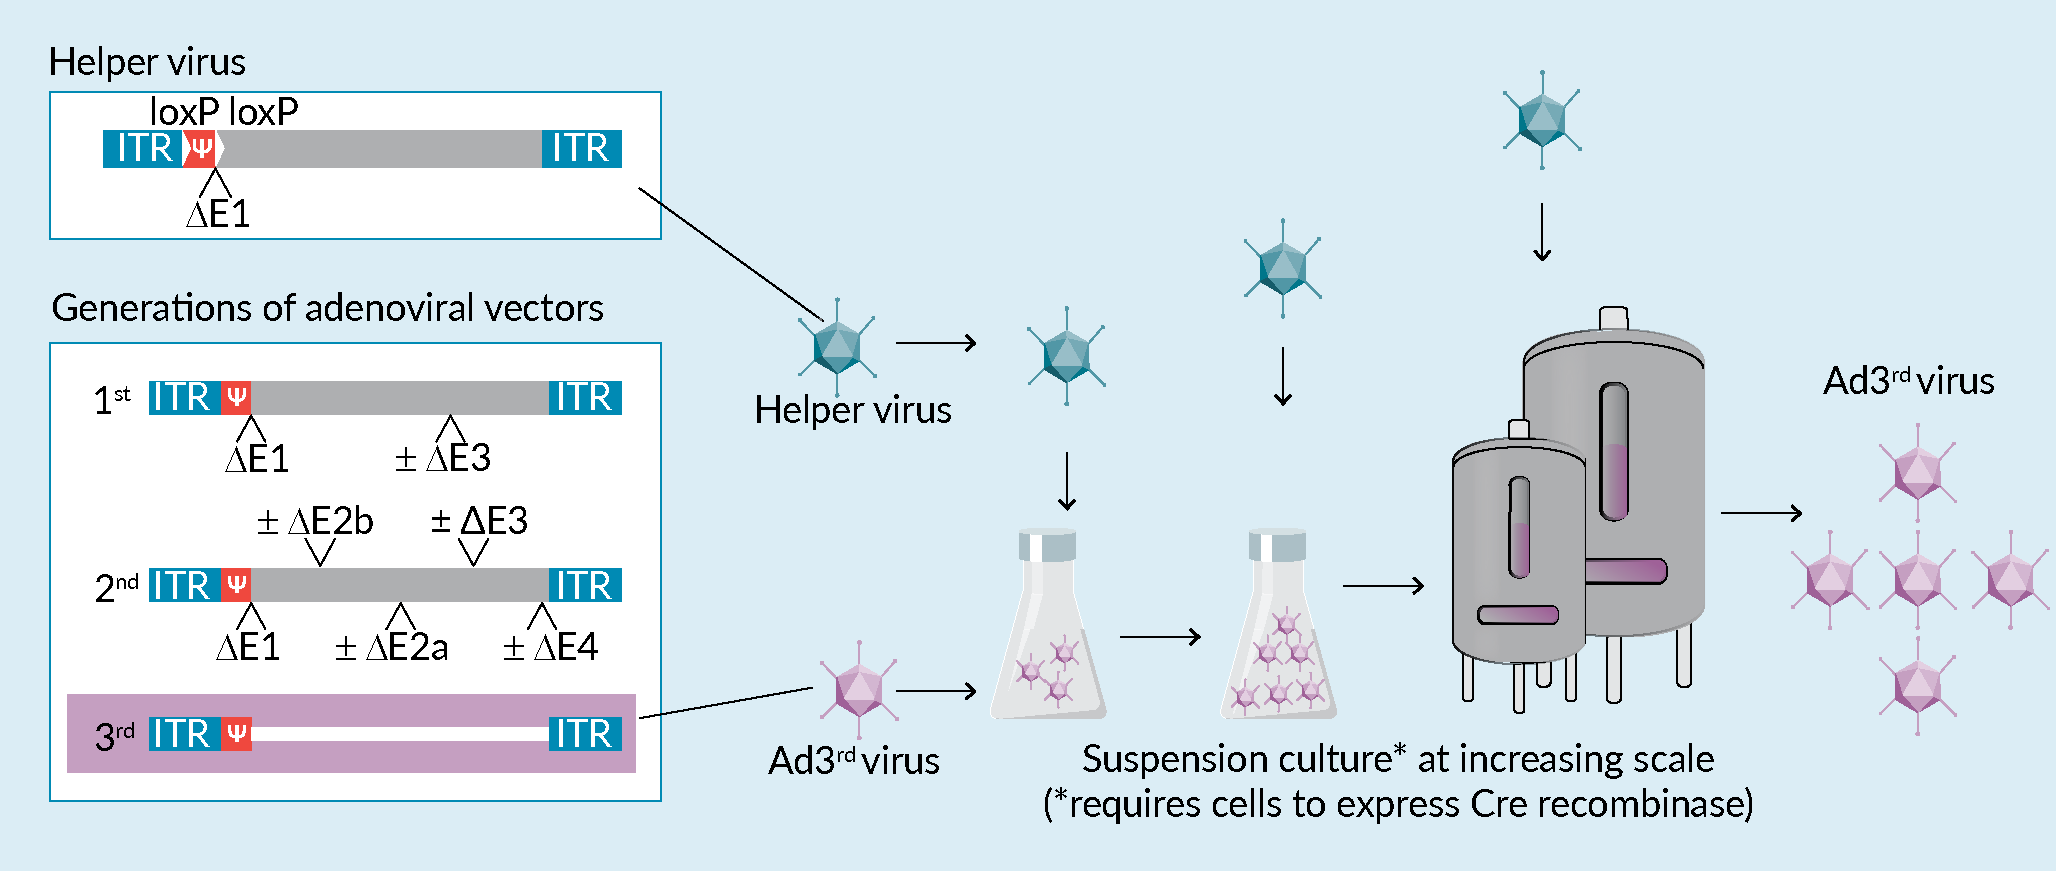 The left box illustrates the genome of the helper virus and of the different generations of adenoviral vectors. The flow chart at the bottom schematically depicts the production process of Ad3rd vectors suspension cells. Production is conducted in increasingly larger volumes with cells requiring coinfection with a helper virus at each step. Note that if CAP cells are used for production they will need to express Cre recombinase in order to delete the loxP-flanked packaging signal Ψ of such helper virus. RCA-formation can occur at any step, including the production of the helper virus itself.